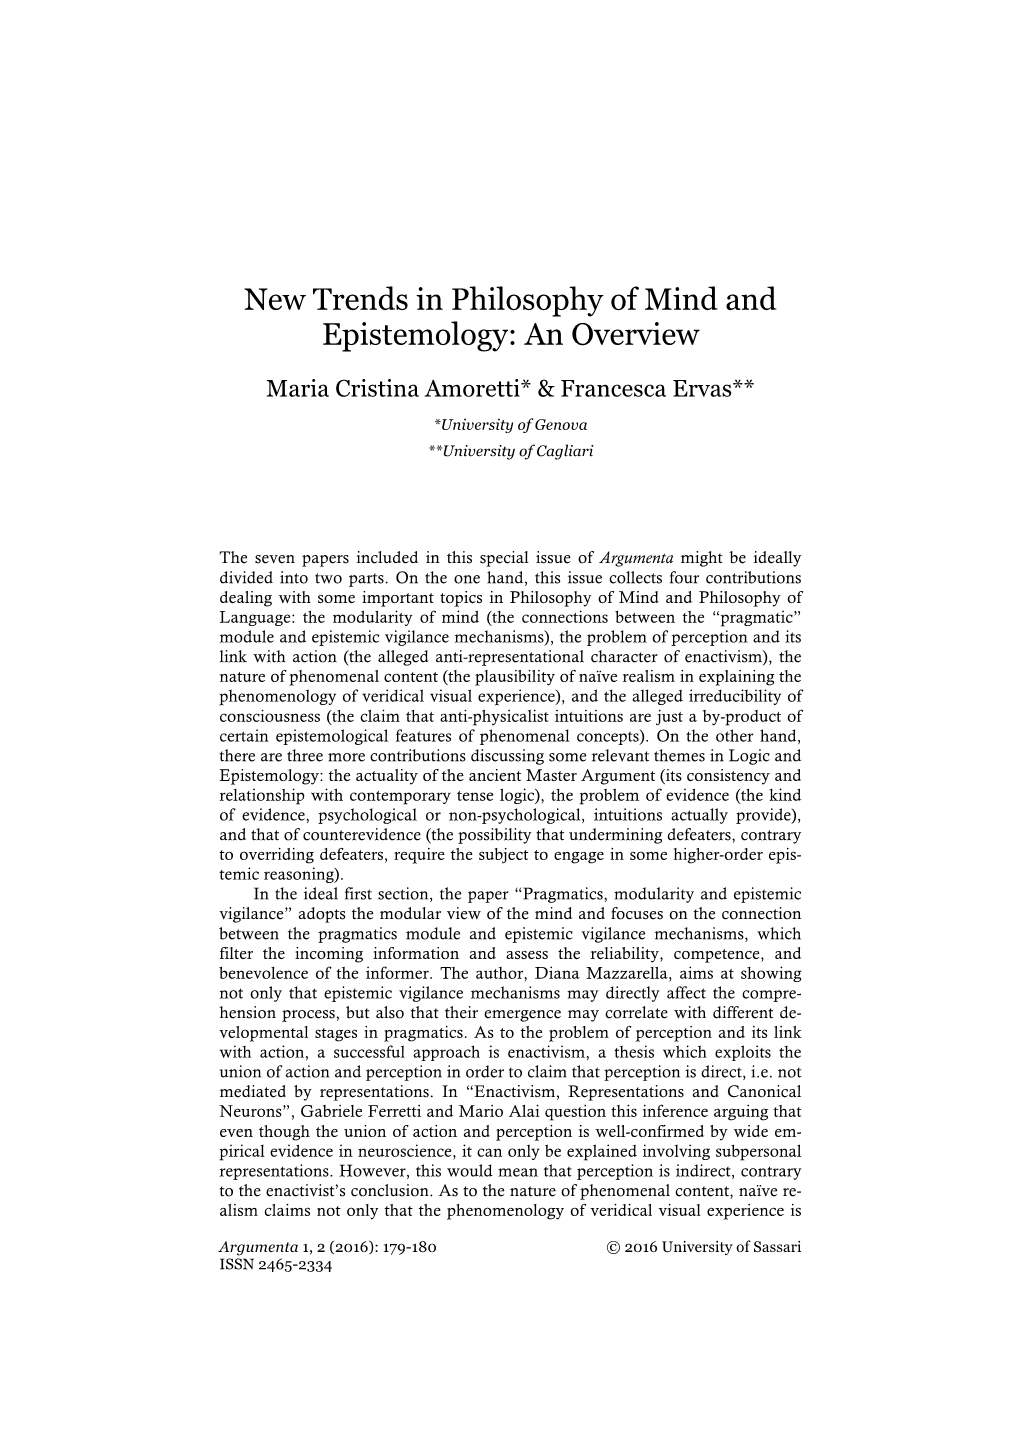 New Trends in Philosophy of Mind and Epistemology: an Overview